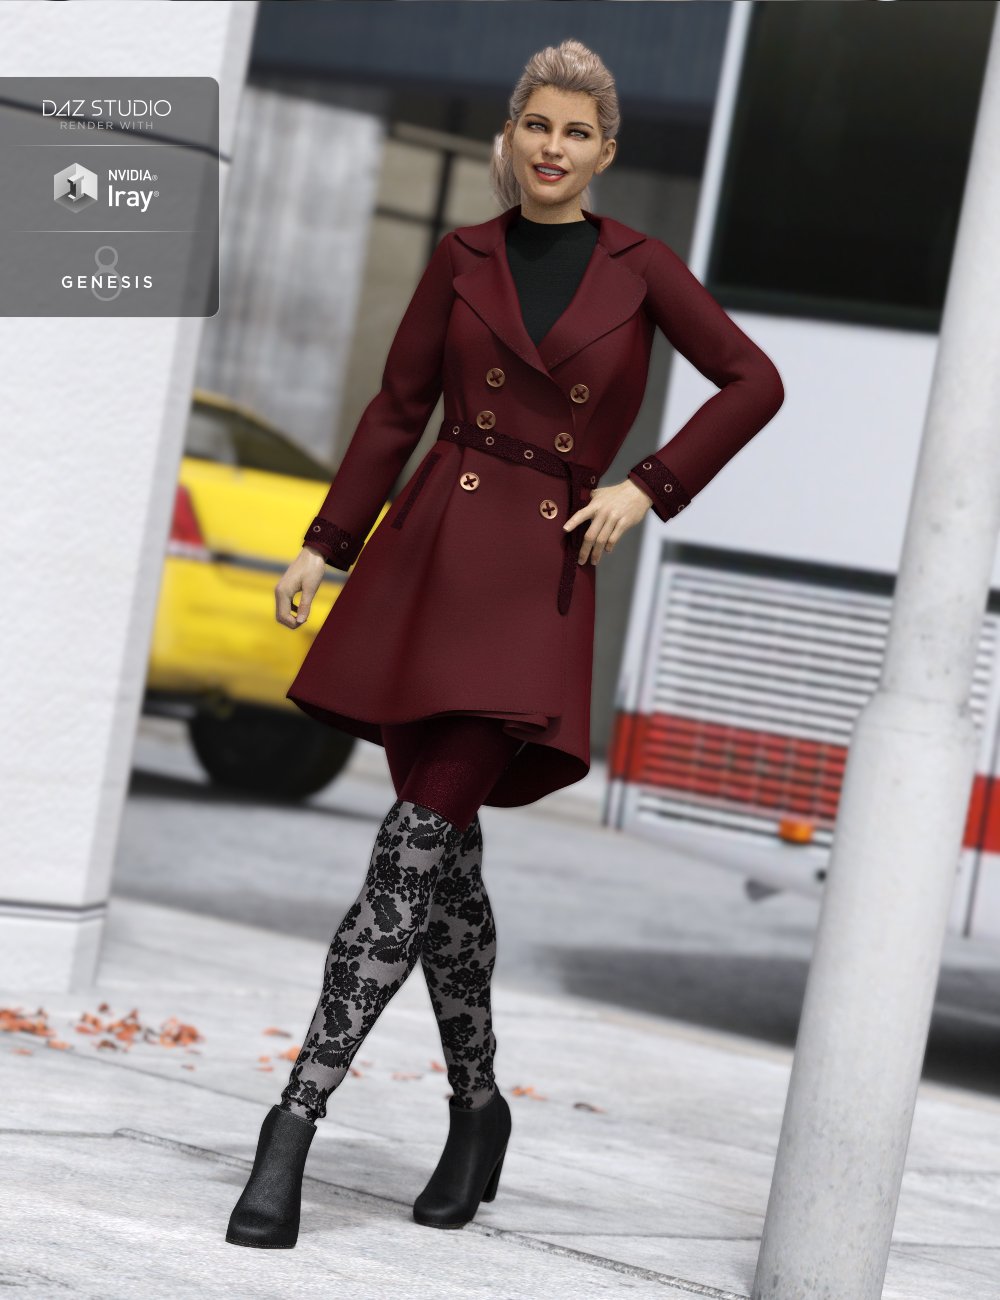 Trench Coat Outfit Textures by: Anna Benjamin, 3D Models by Daz 3D